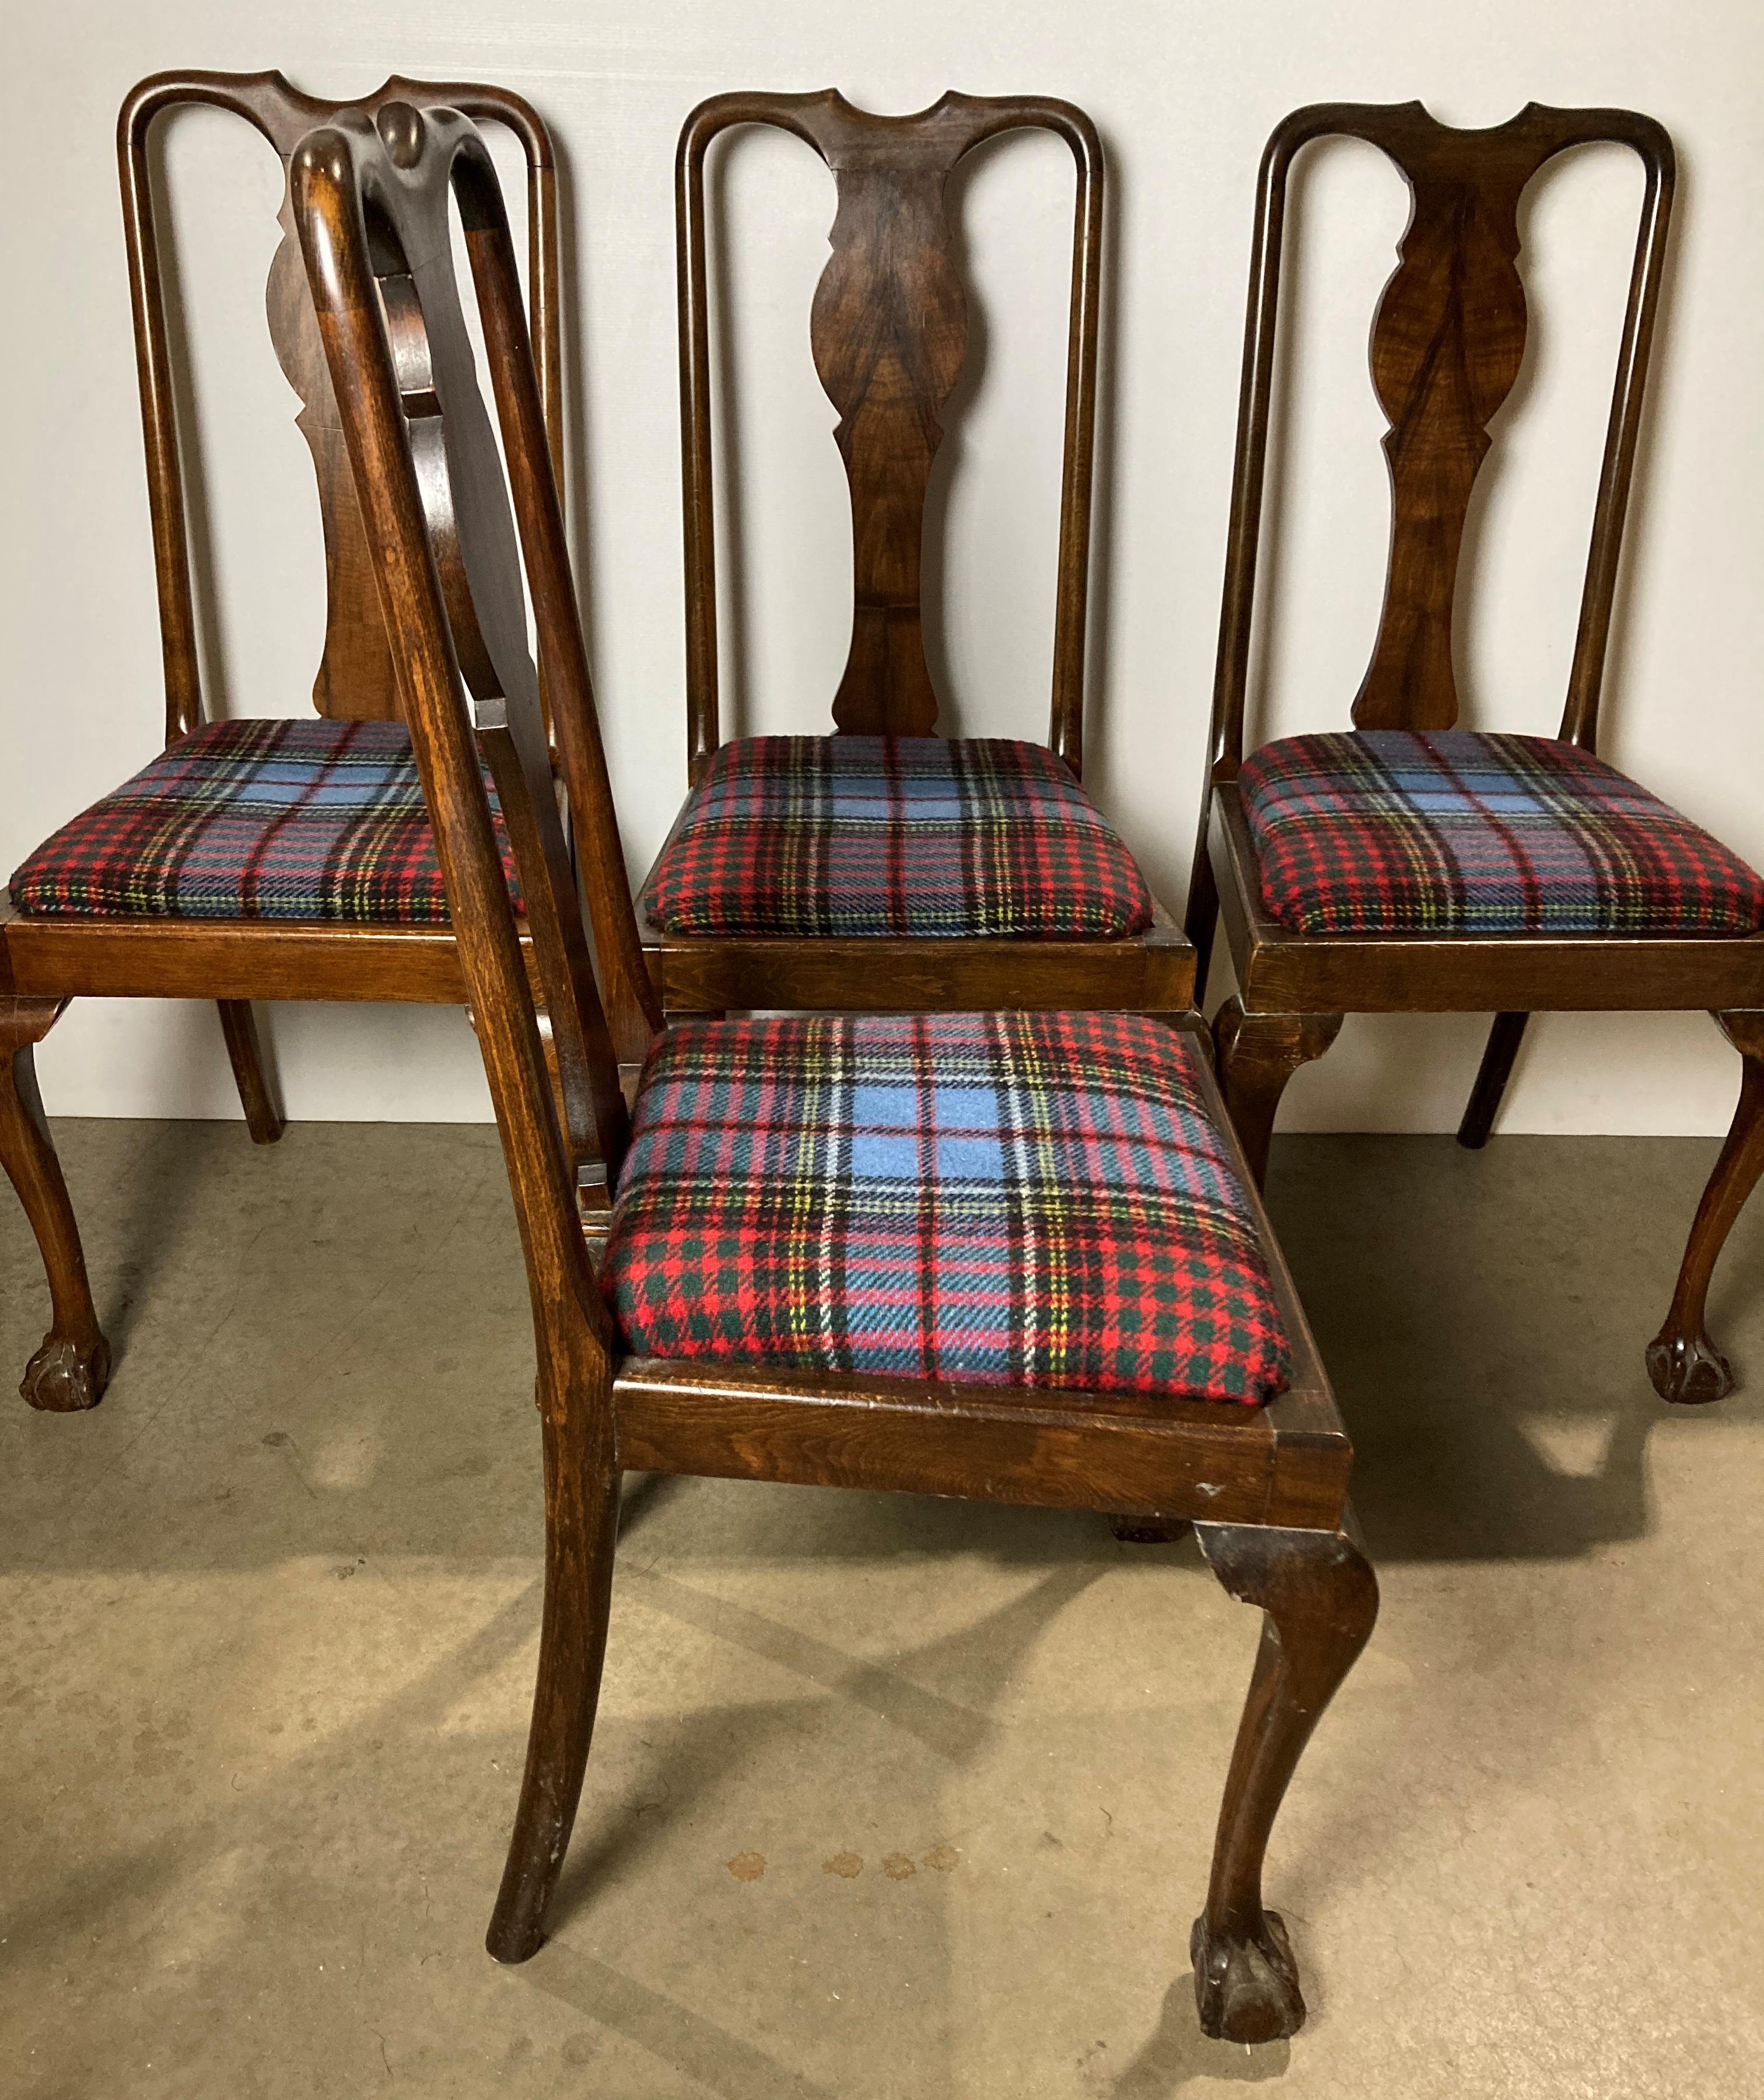 Set of four mahogany dining chairs on claw and ball feet with tartan-style fabric (re-upholstered) - Image 4 of 4